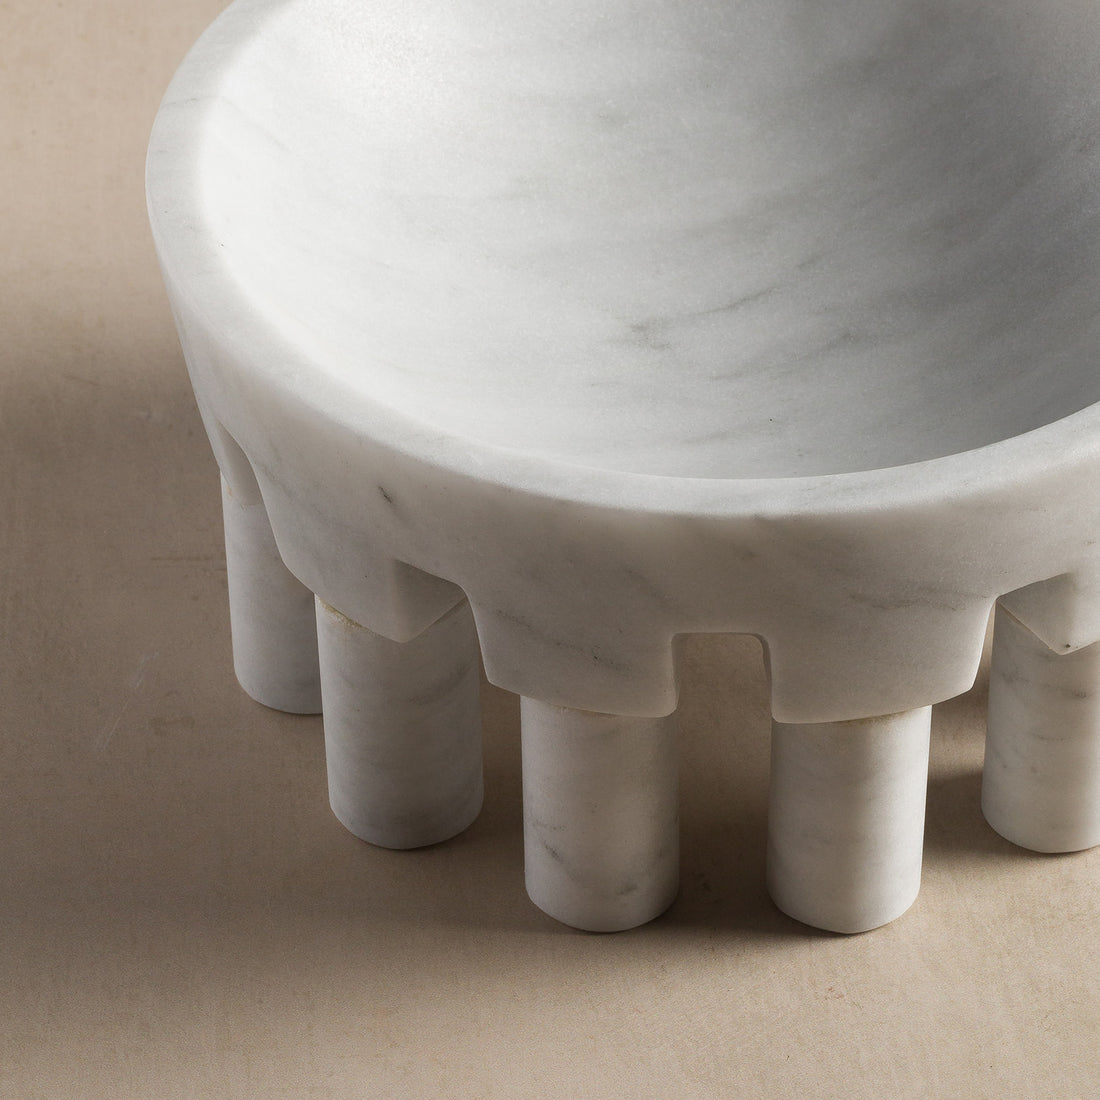 Details of round curves on white marble stone bowl with feet